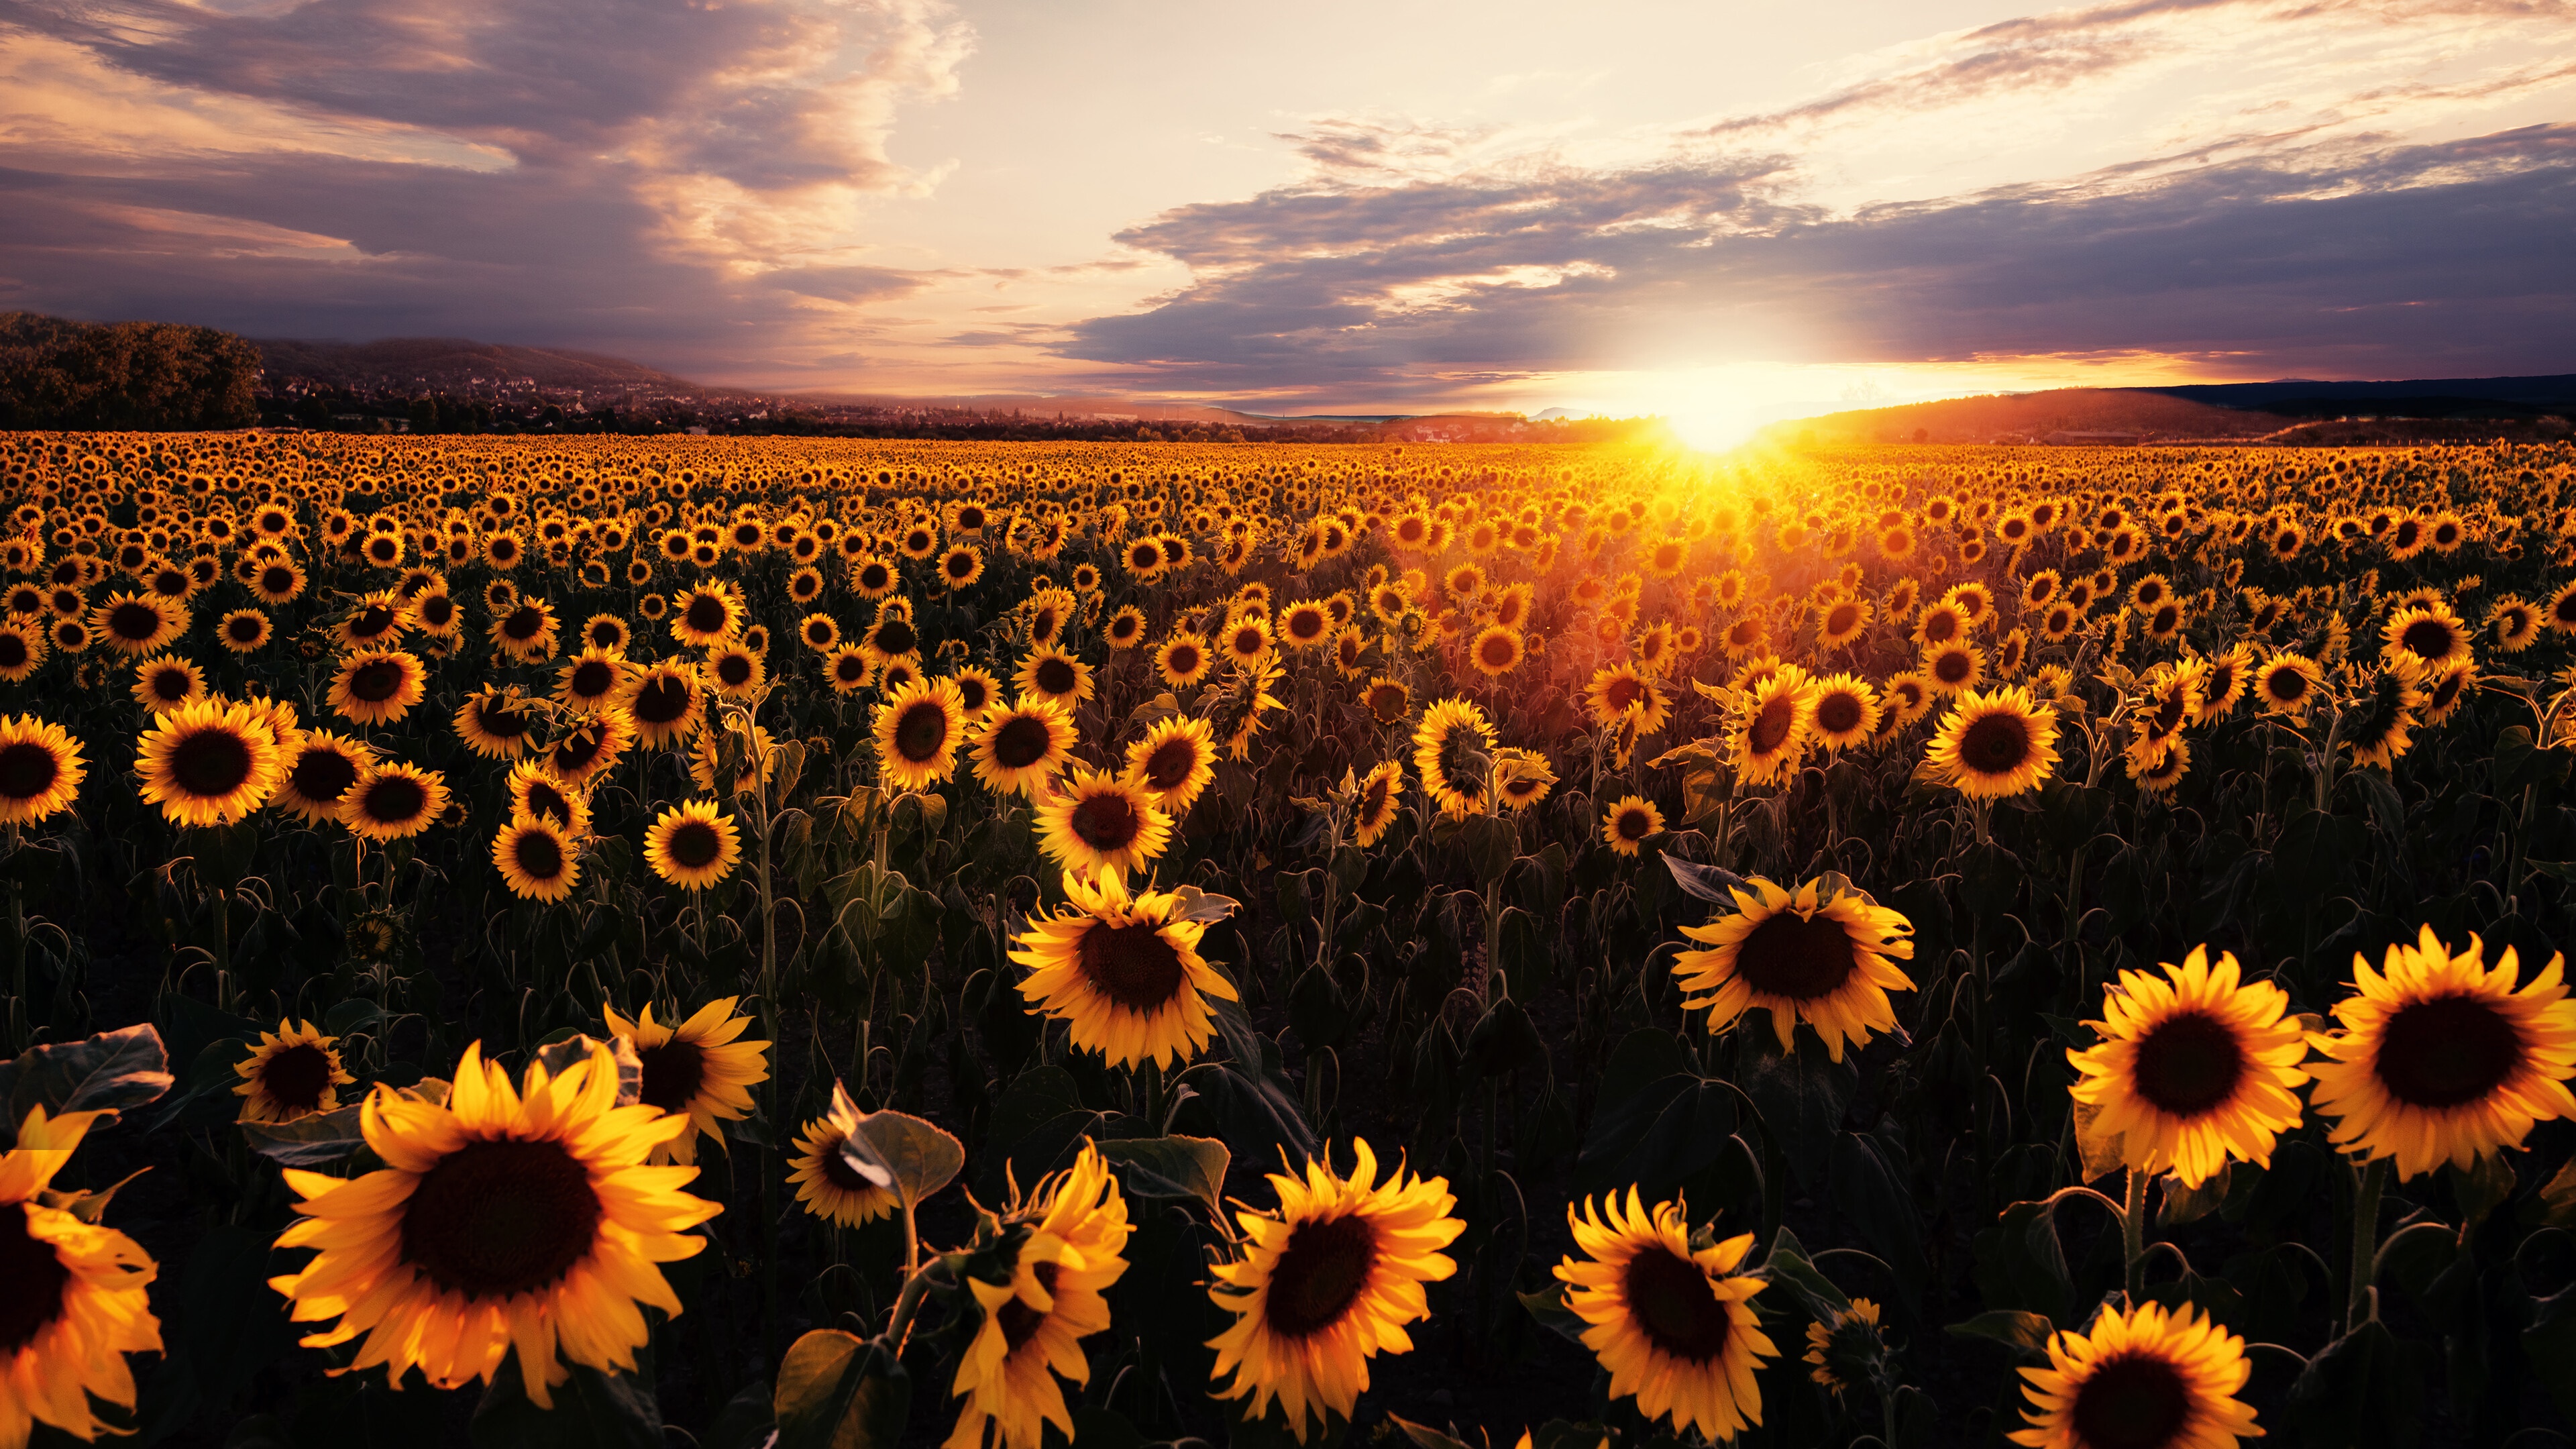 Sunflowers Nature Wallpapers